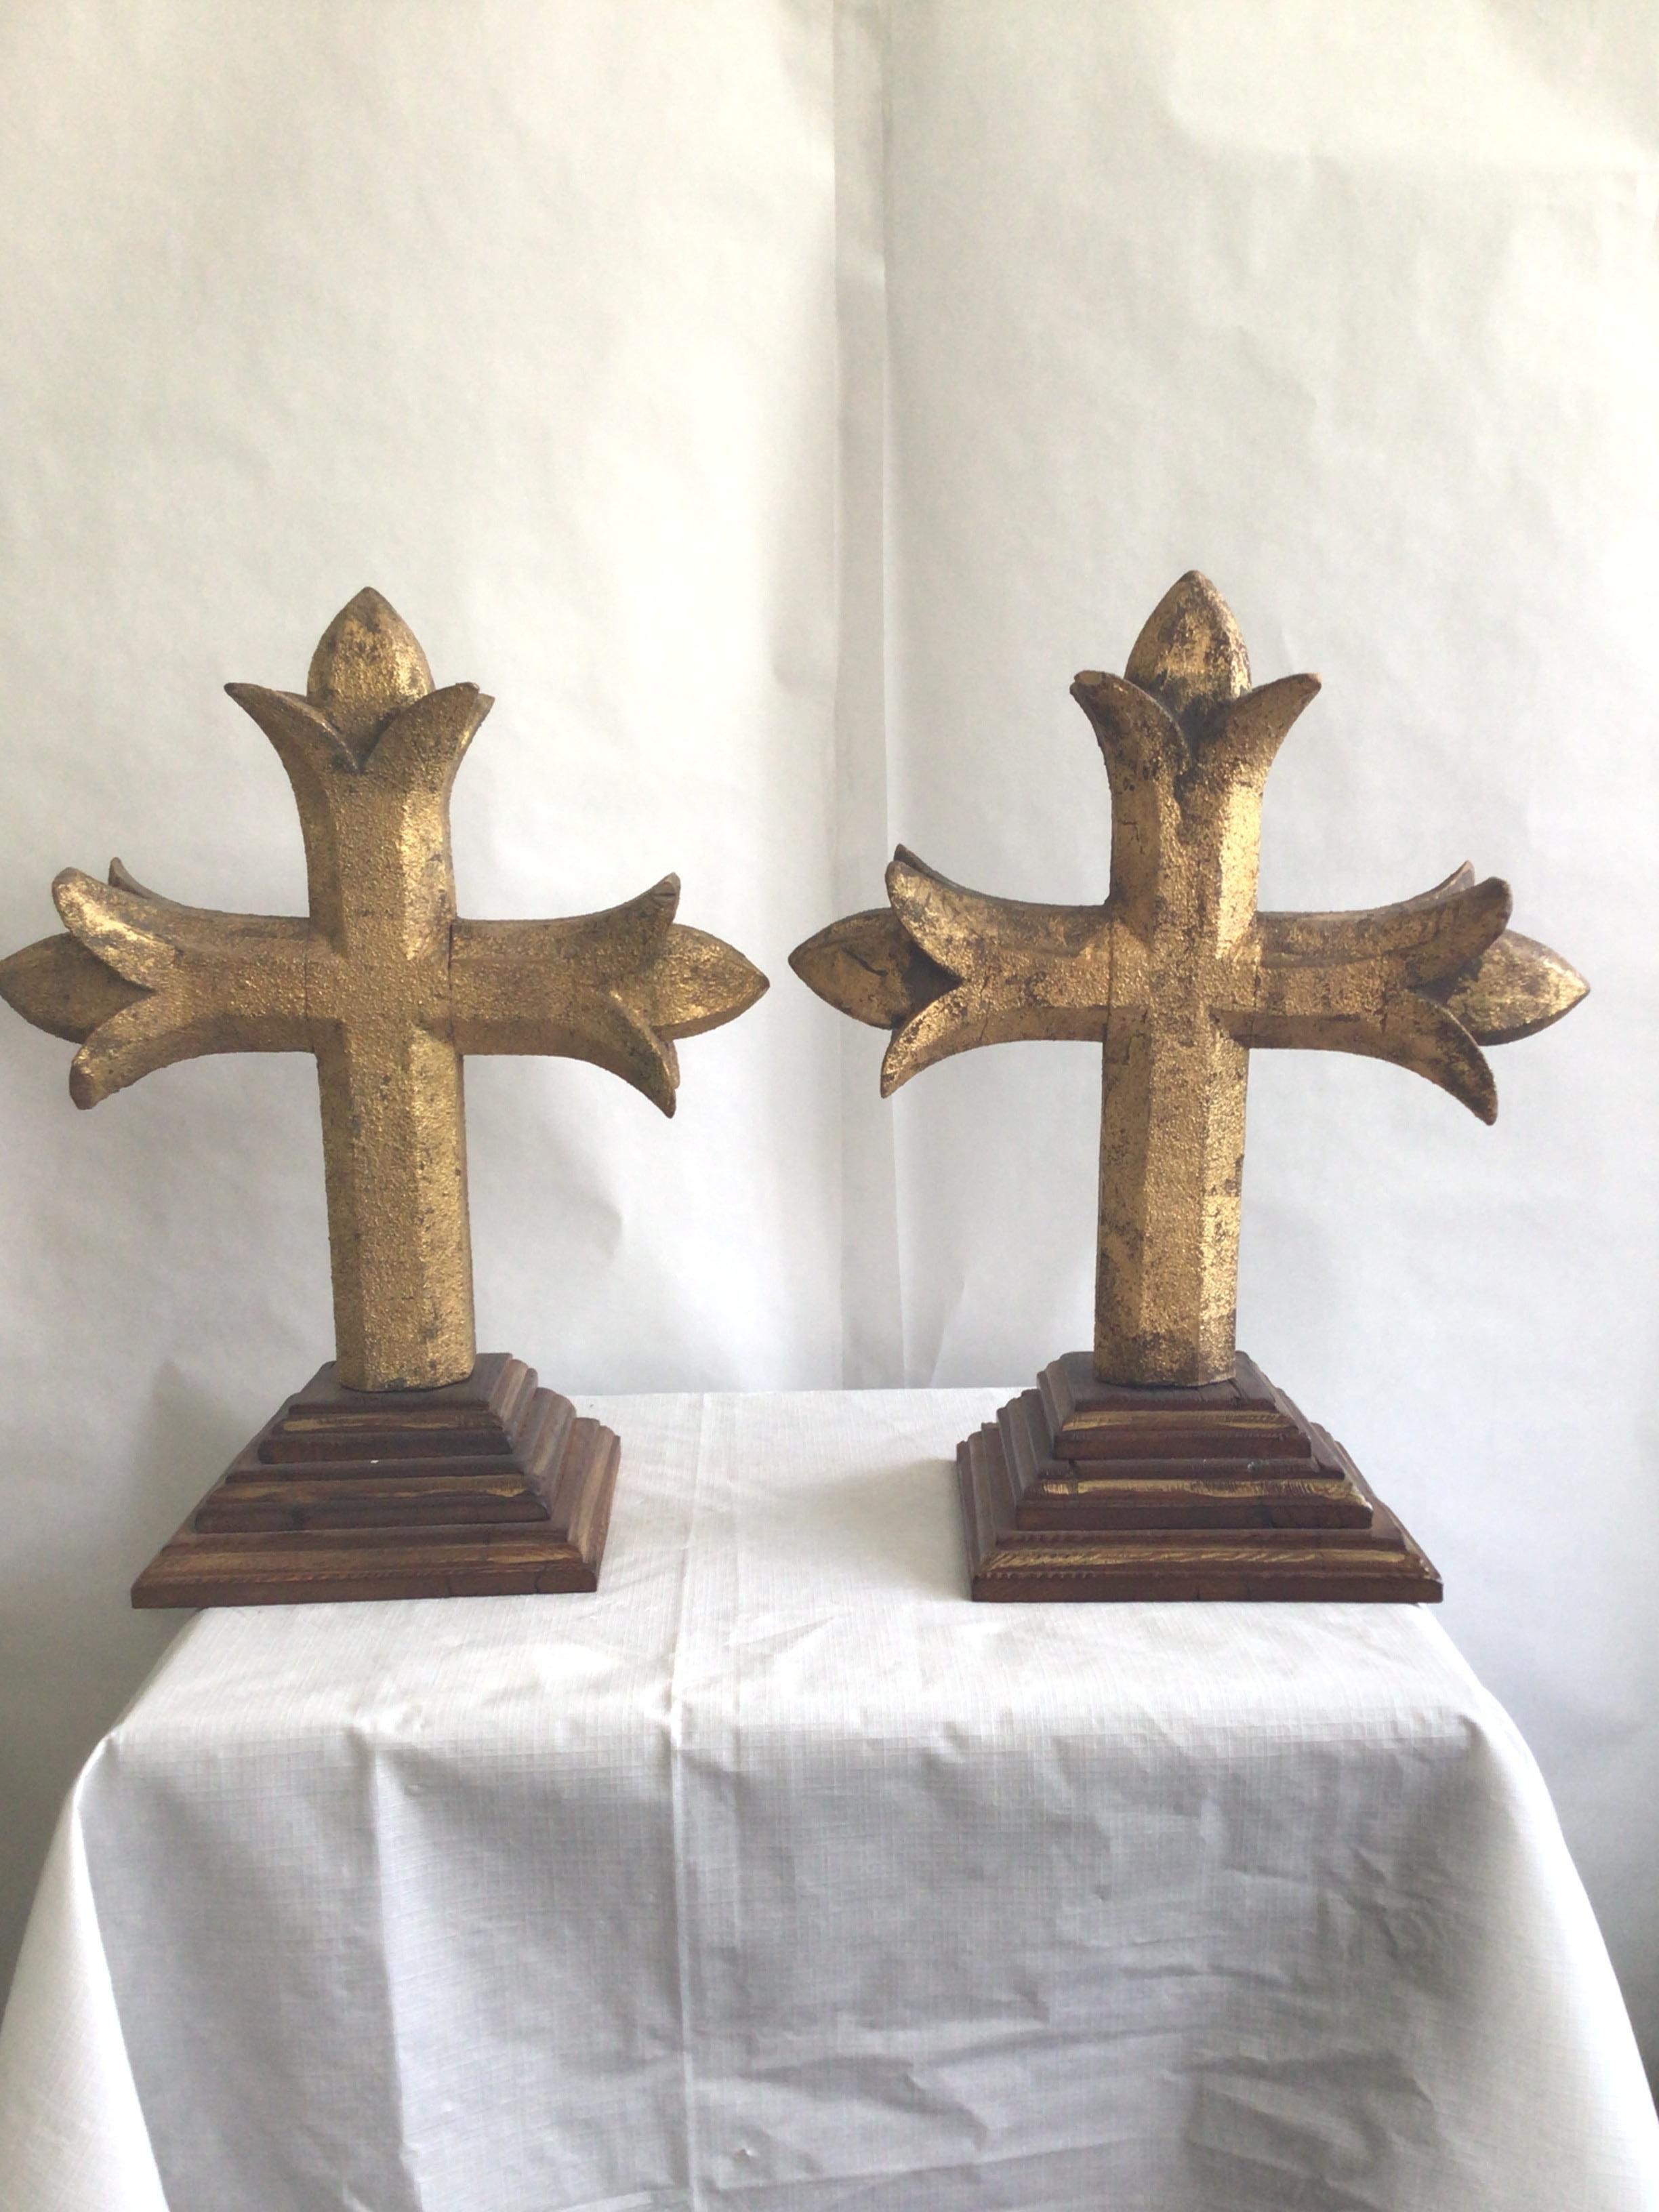 Pair of 1880s Carved Gilt Crosses On A Wood Step Base
Loss of gilt on crosses
PRICE PER ITEM (each) 